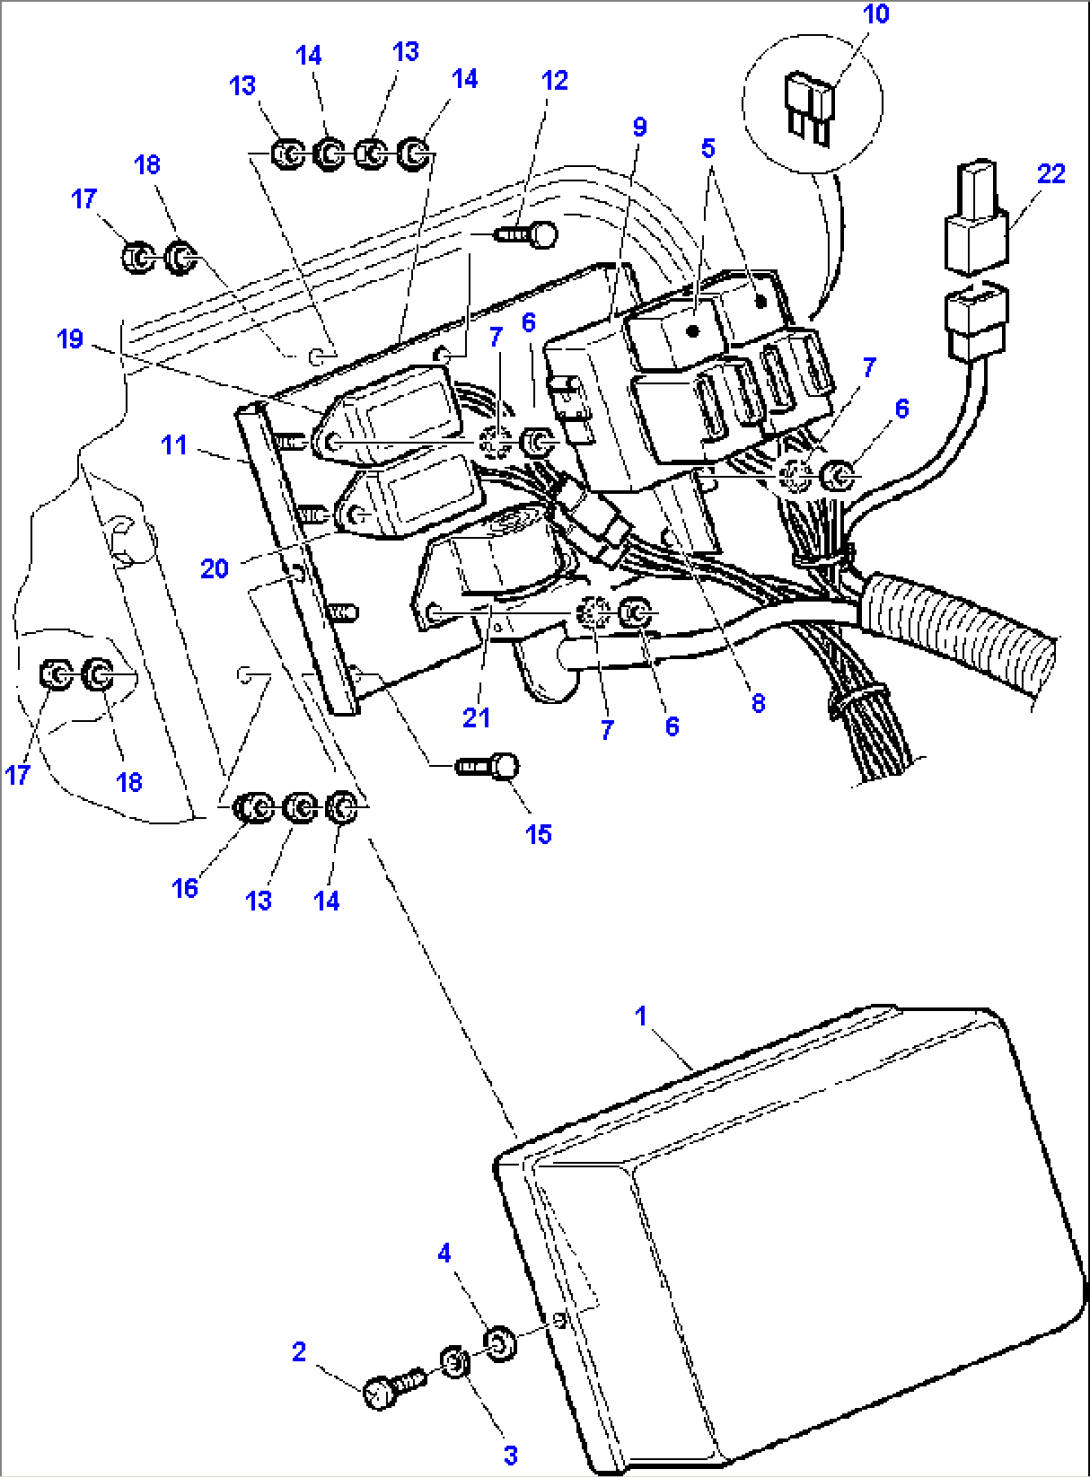 FIG. E1540-03A0 ELECTRICAL SYSTEM - MOTOR WIRING